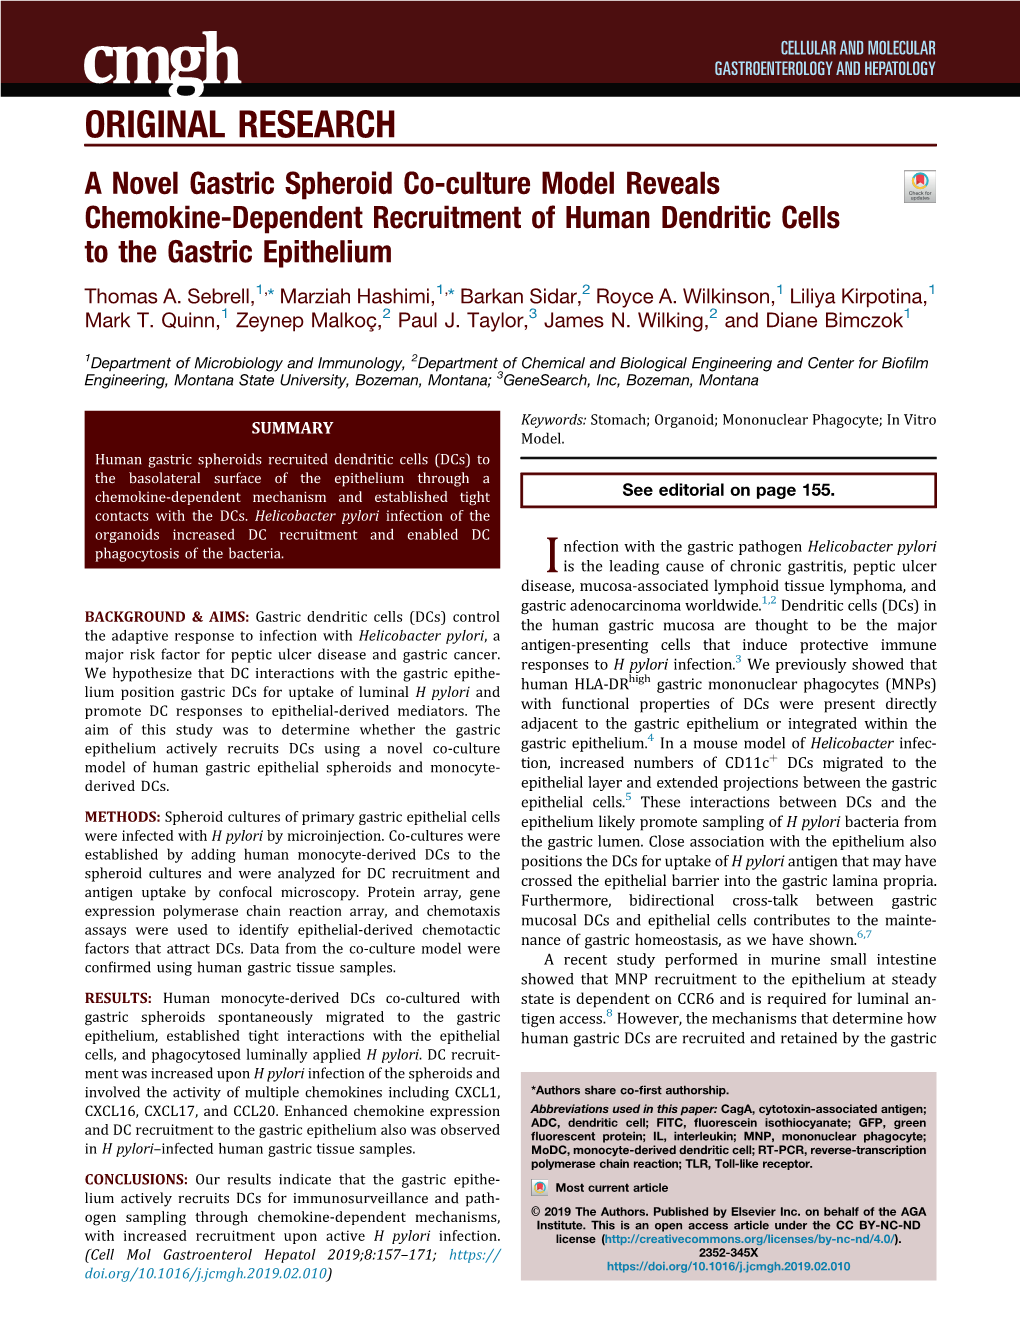 A Novel Gastric Spheroid Co-Culture Model Reveals Chemokine-Dependent Recruitment of Human Dendritic Cells to the Gastric Epithelium Thomas A